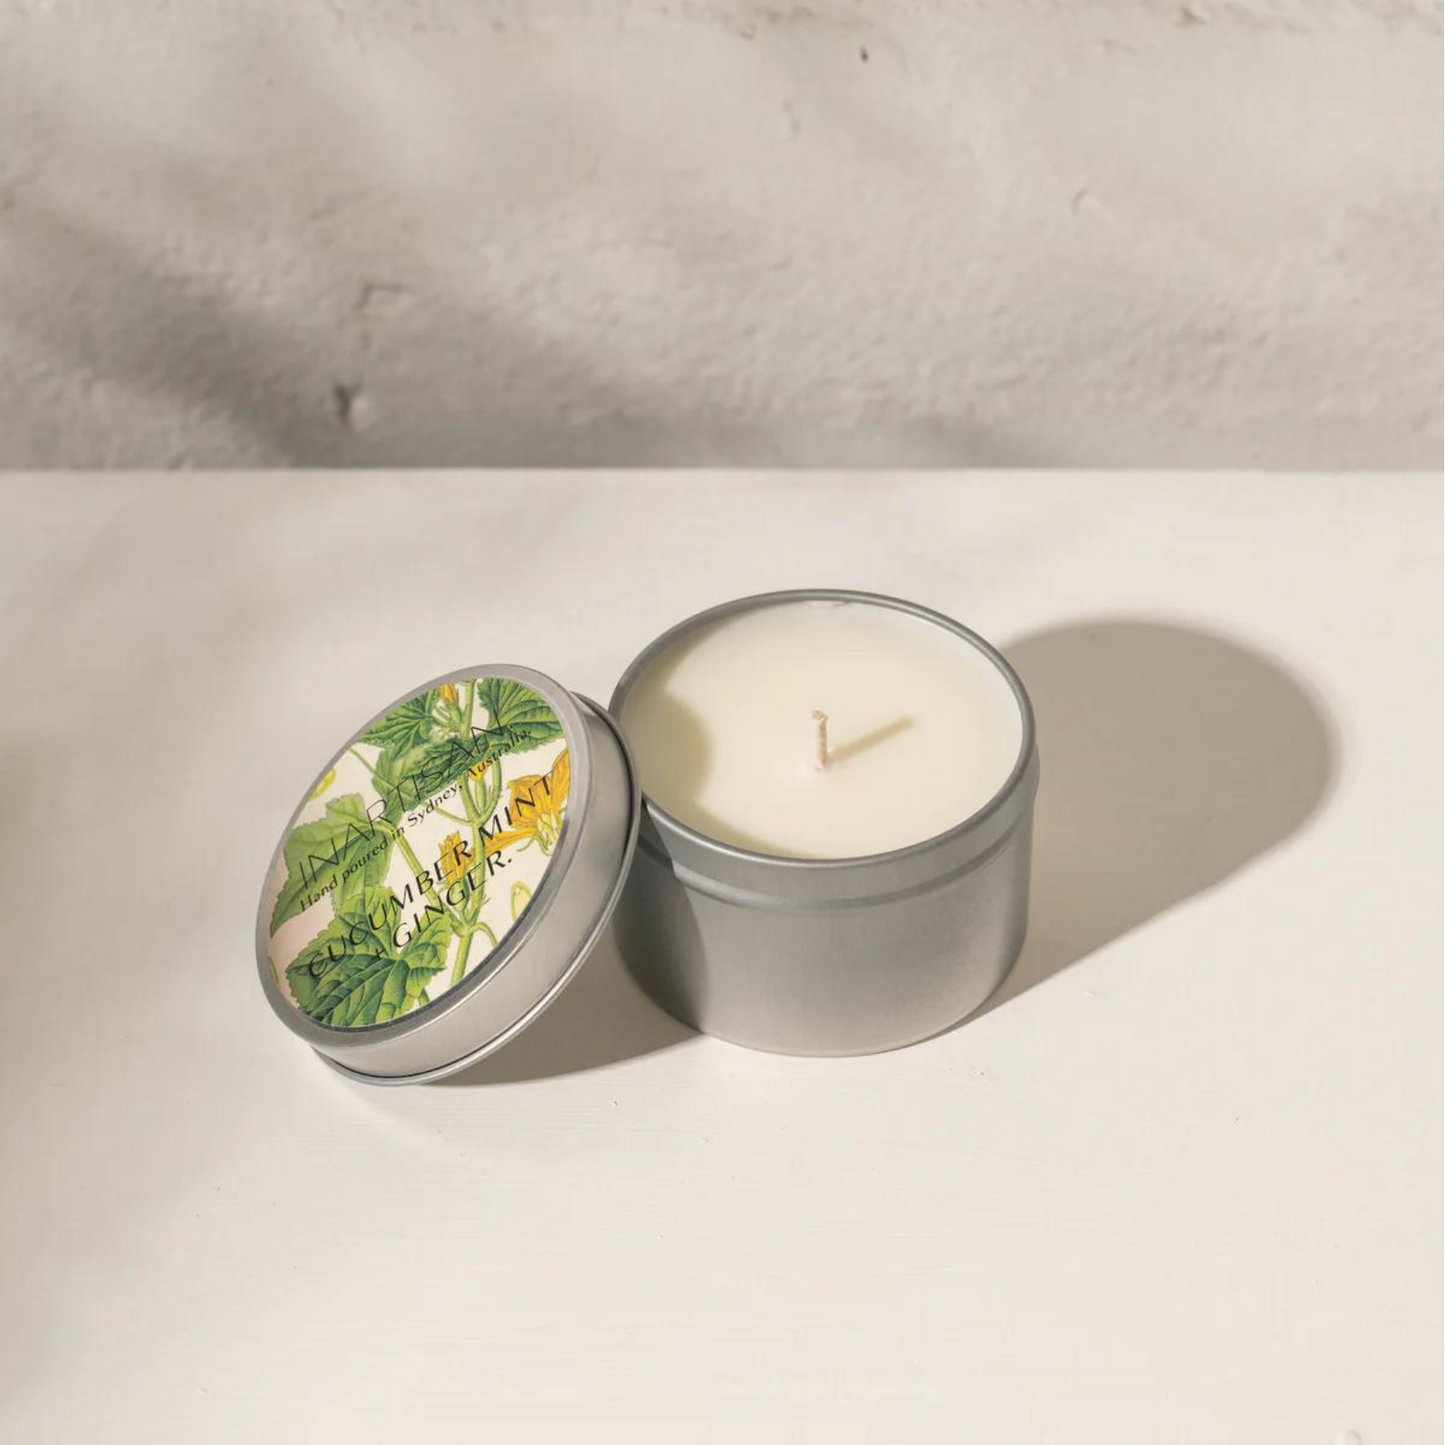 Inartisan Travel Candle - Cucumber Mint & Ginger